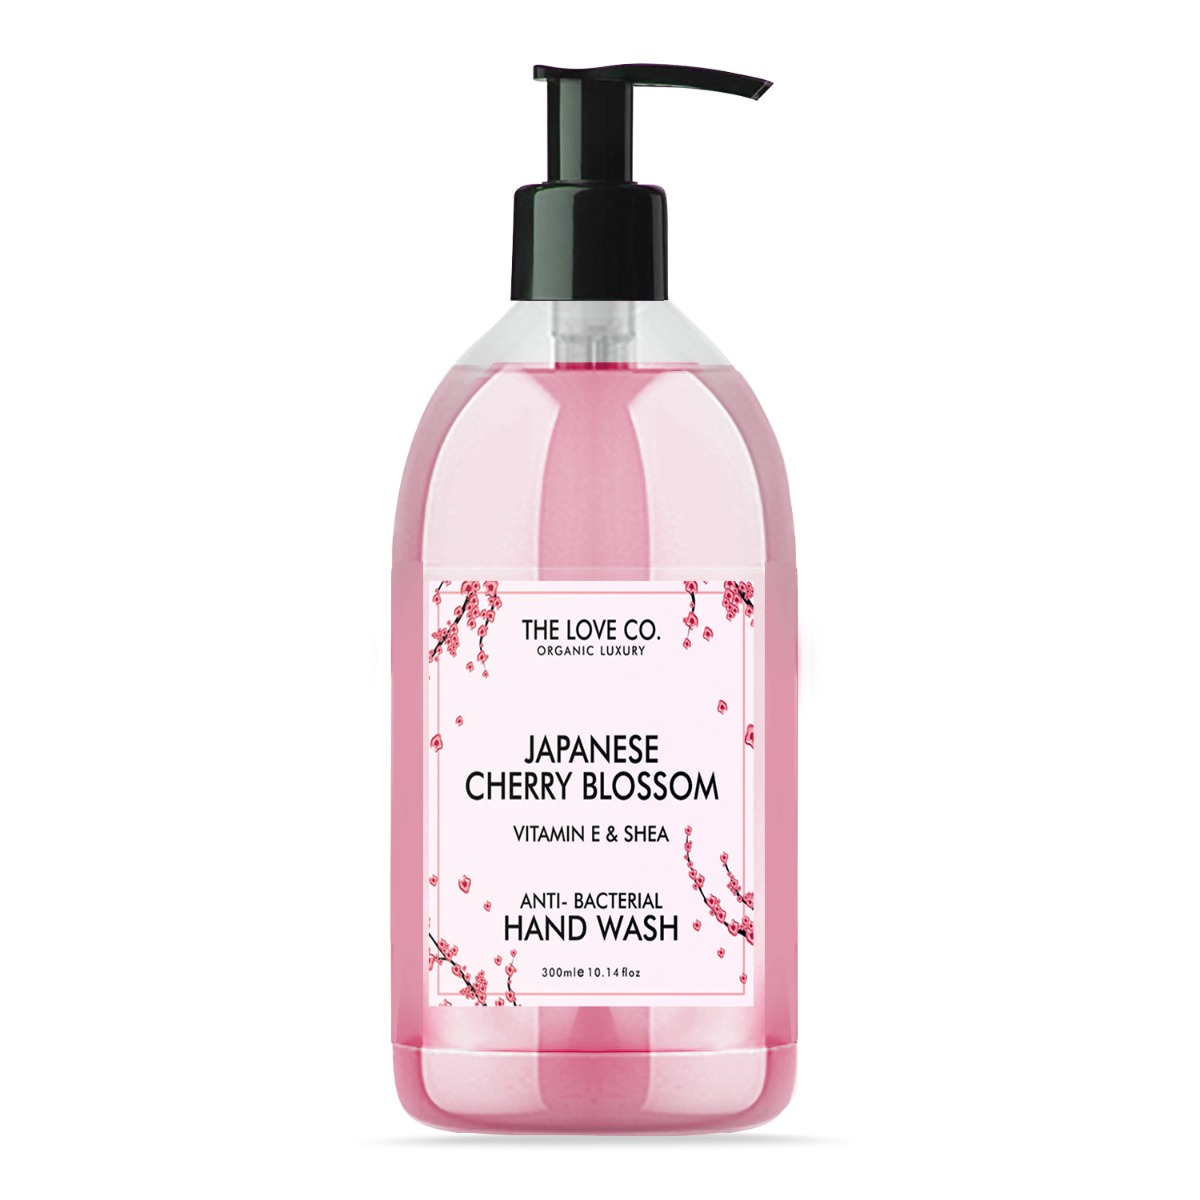 The Love Co. Japanese Cherry Blossom Anti-Bacterial Hand Wash, 300ml